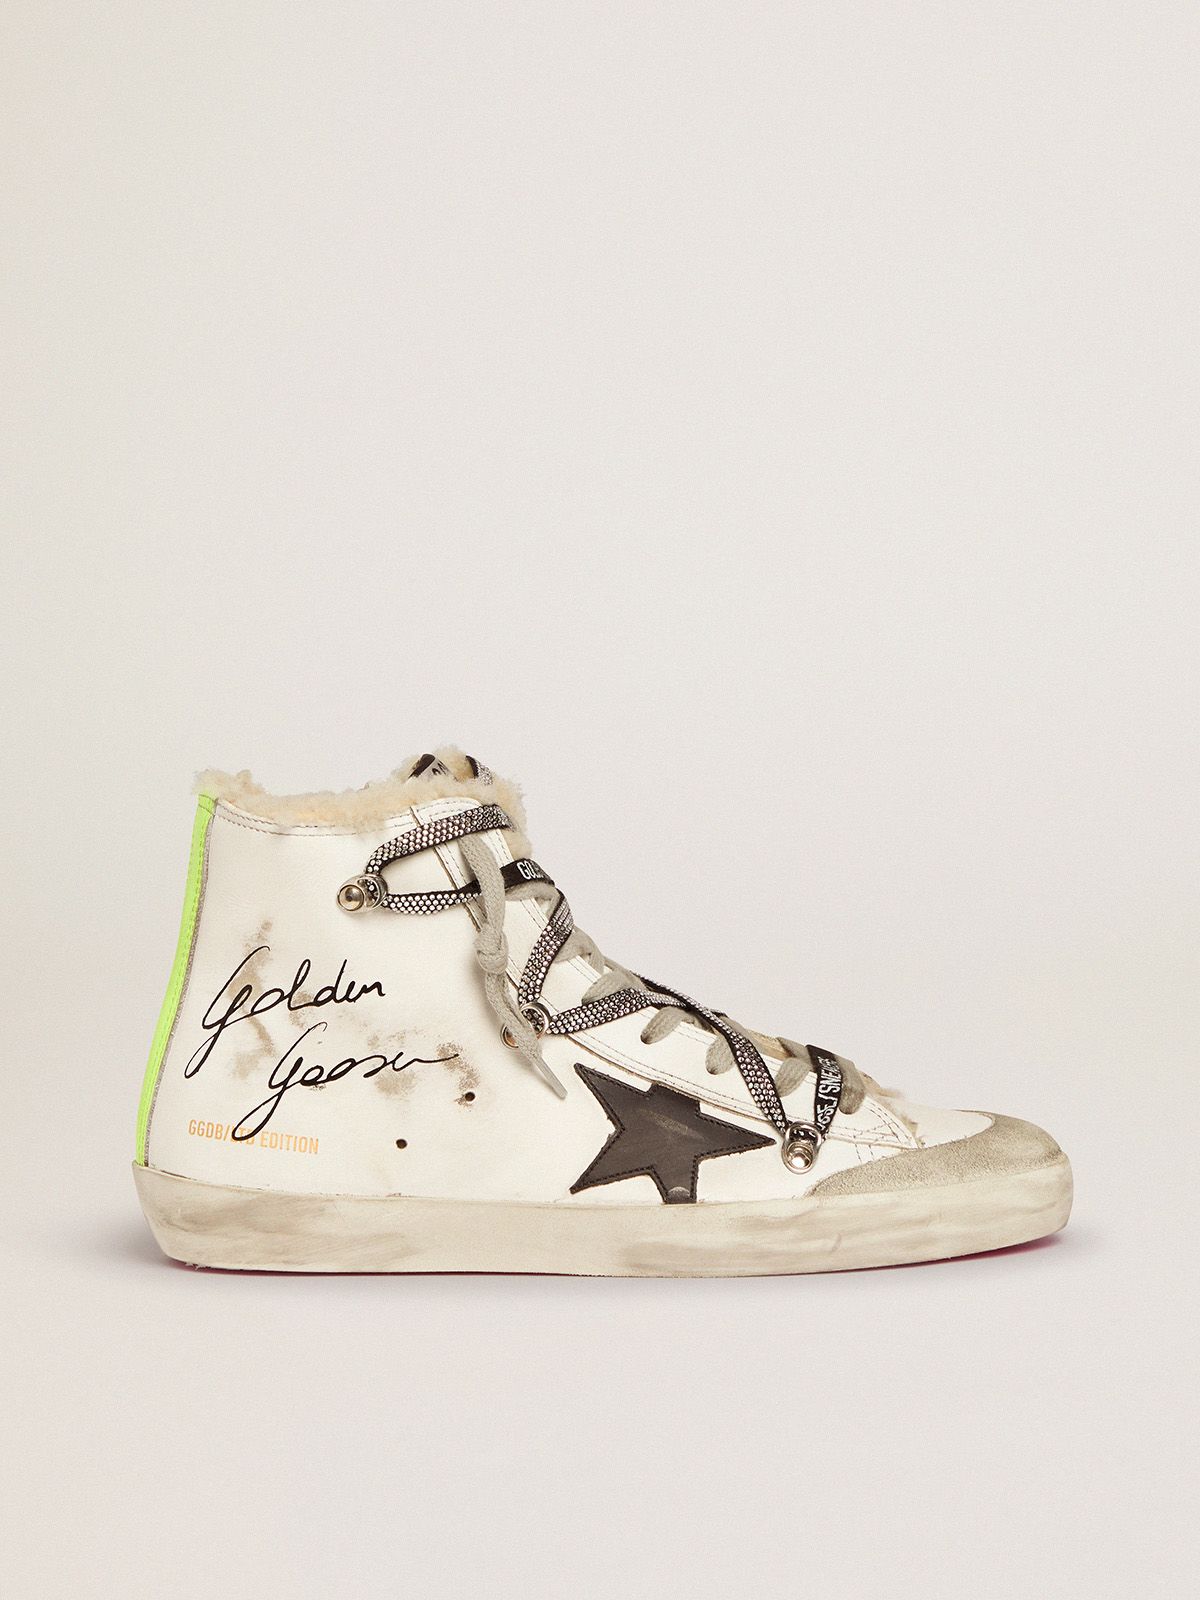 Sneakers Donna Golden Goose Francy Penstar LAB sneakers with shearling inserts and black star